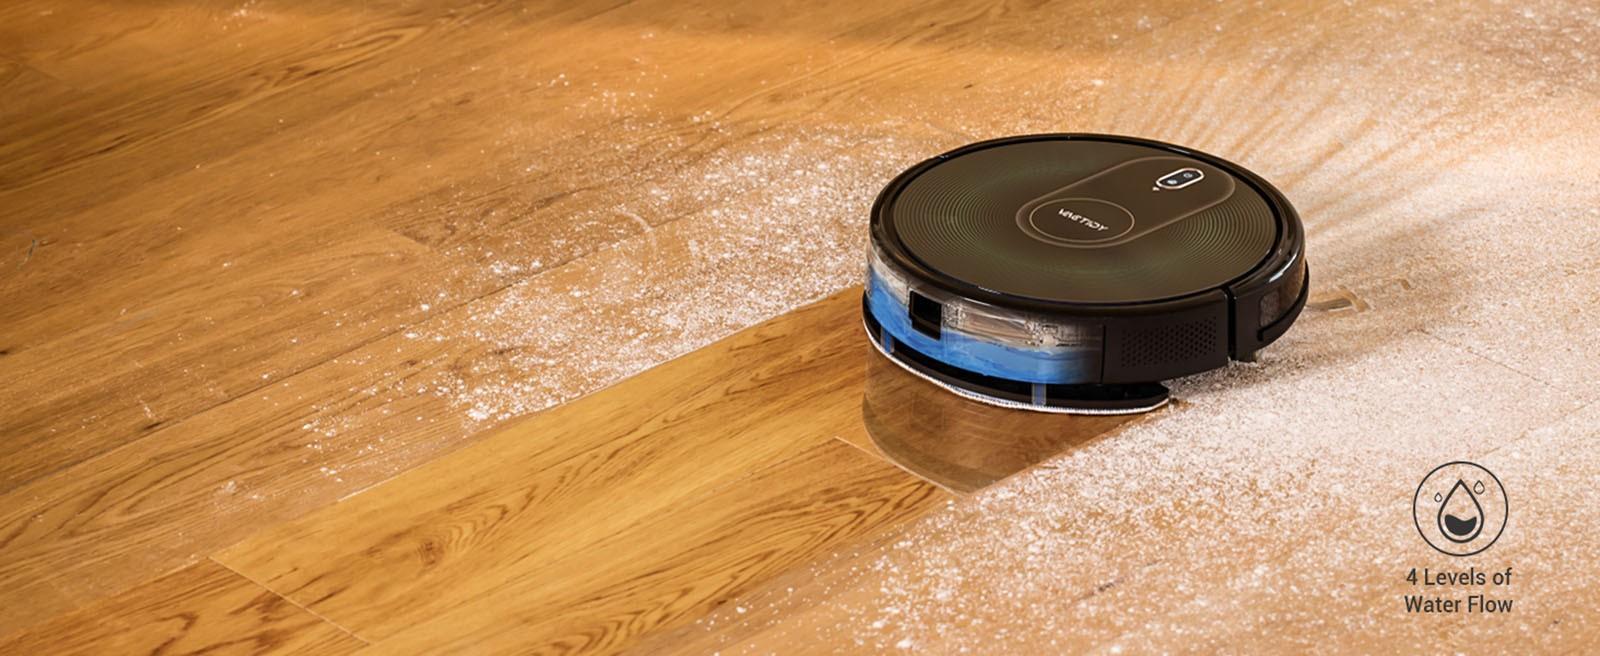 Vactidy T8 Robot Vacuum Cleaner, 2 in 1 Mopping Vacuum, 3000Pa Suction, 250ml Dust Bin, Carpet Detection, App Control